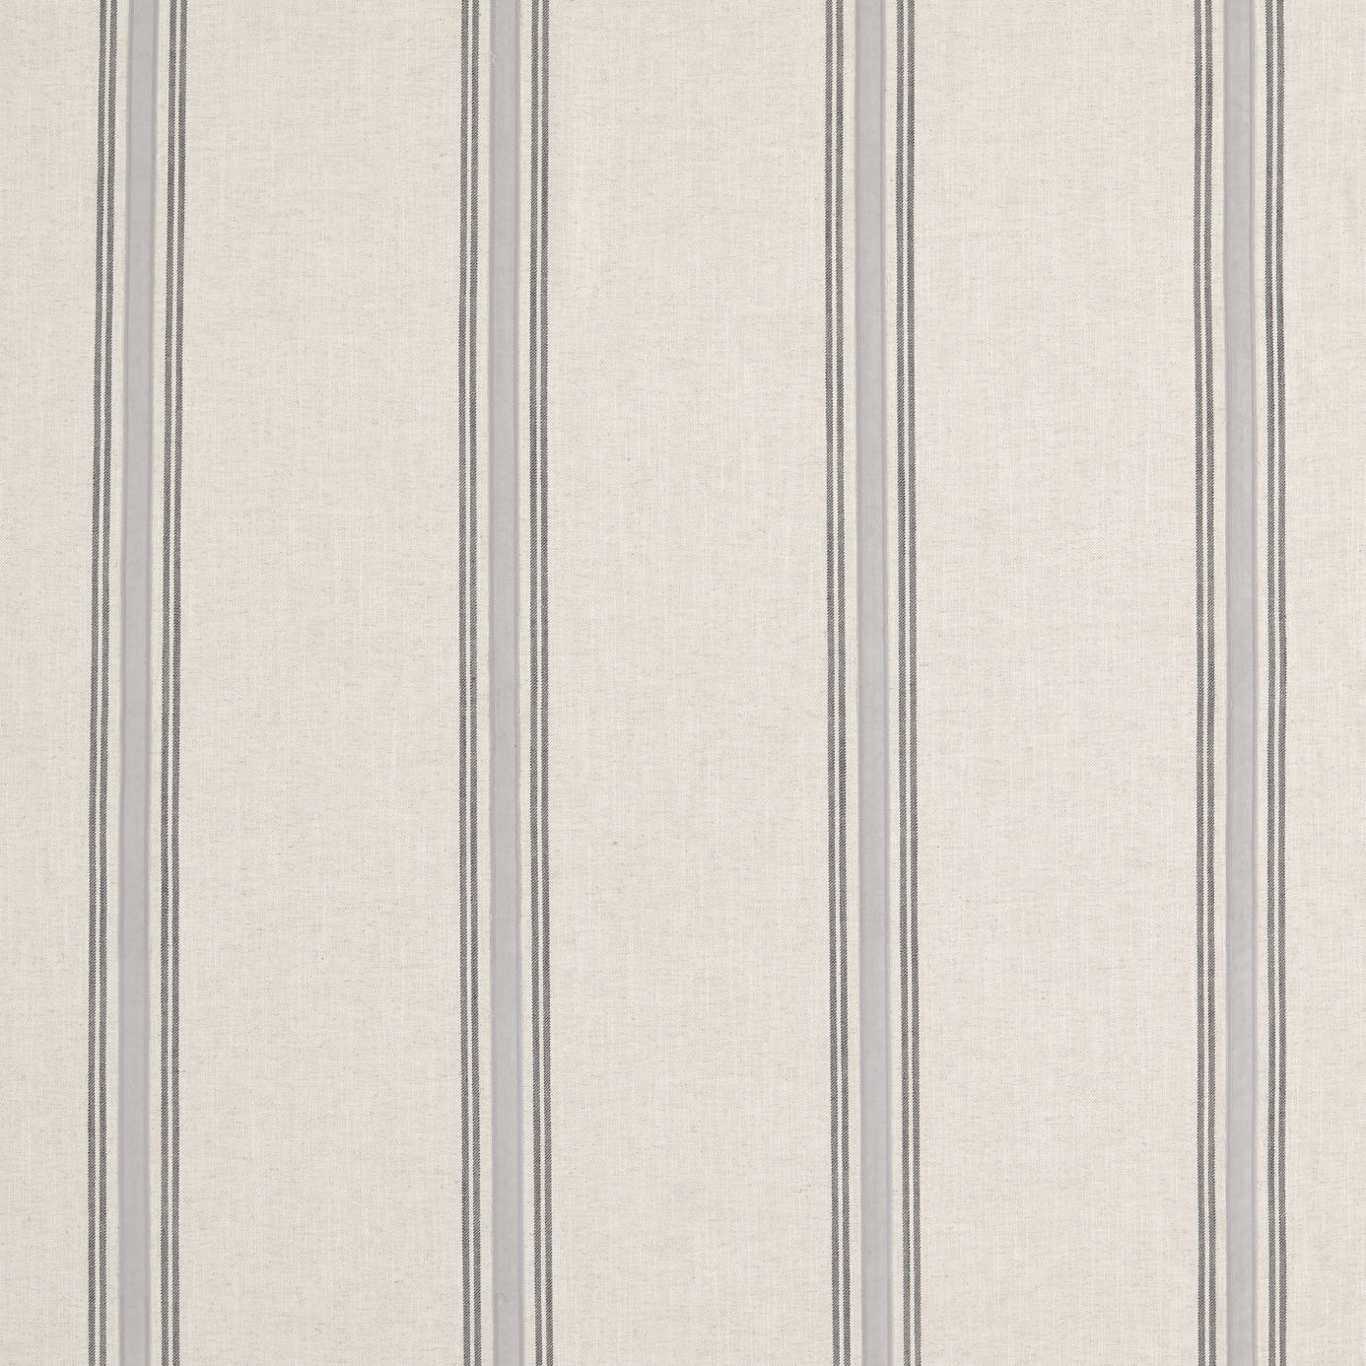 Hockley Stripe Charcoal Fabric by SAN